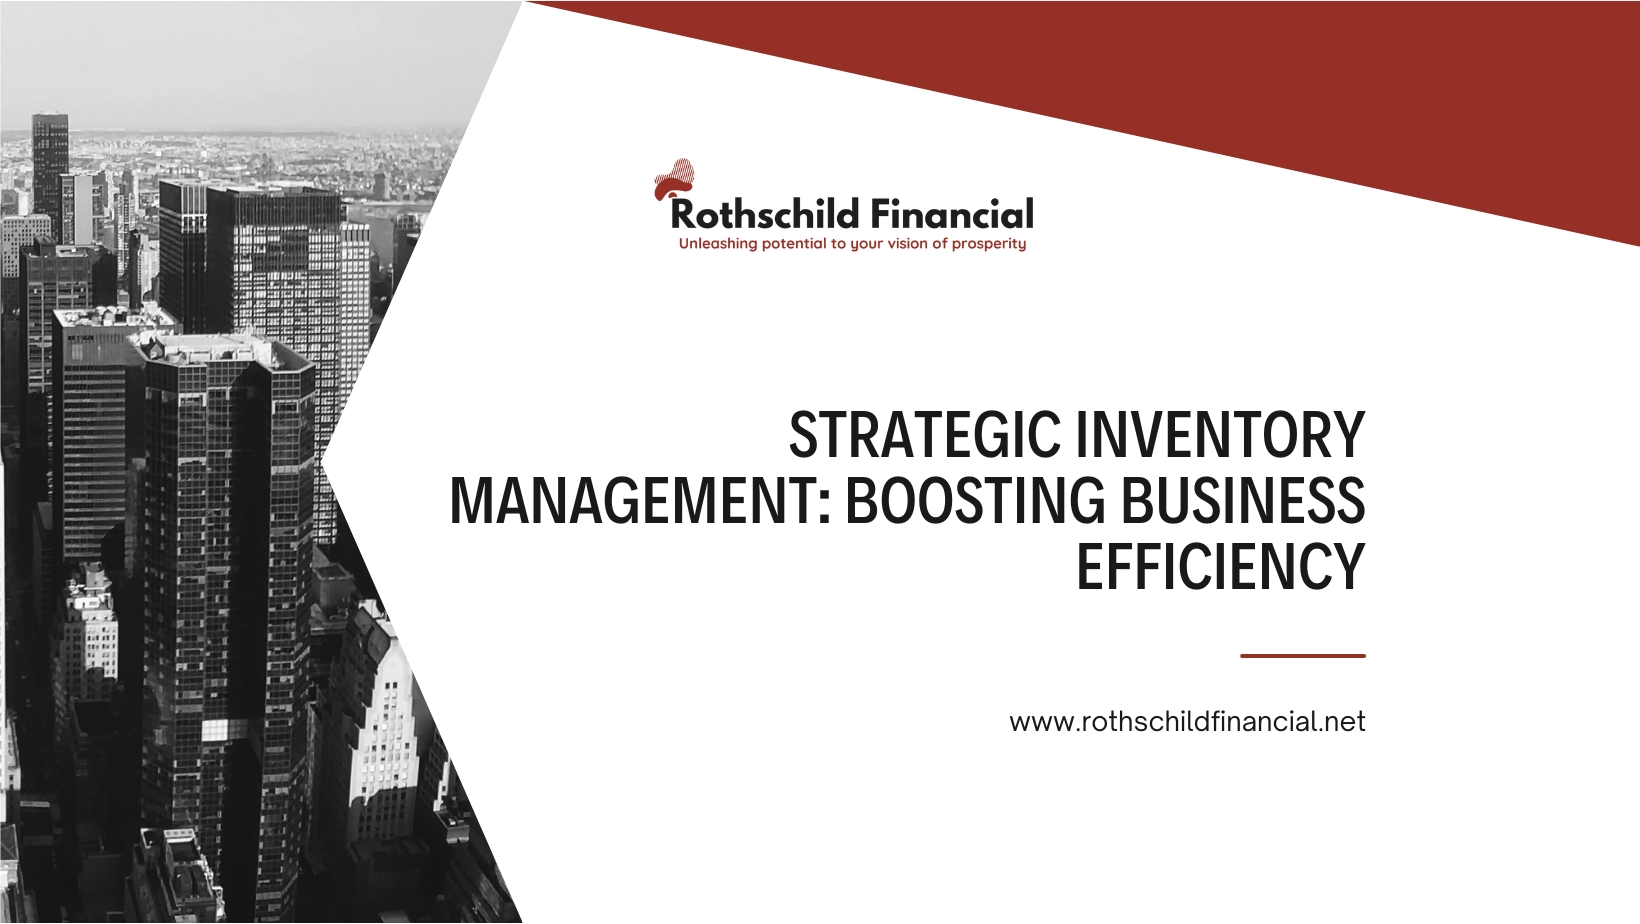 Strategic Inventory Management- Boosting Business Efficiency